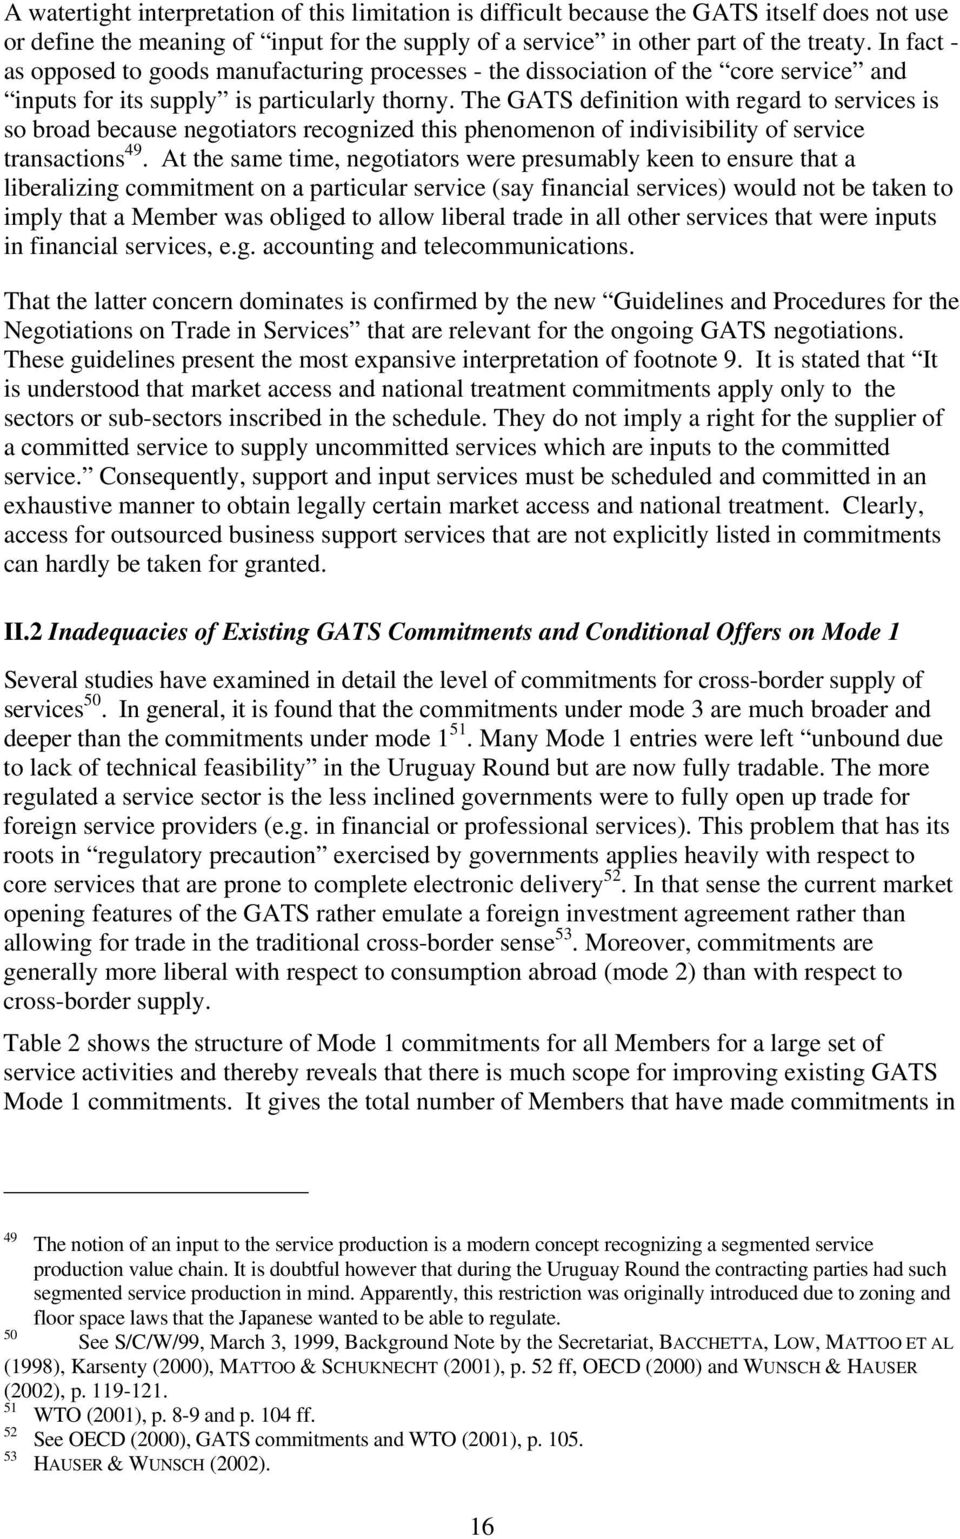 The GATS definition with regard to services is so broad because negotiators recognized this phenomenon of indivisibility of service transactions 49.